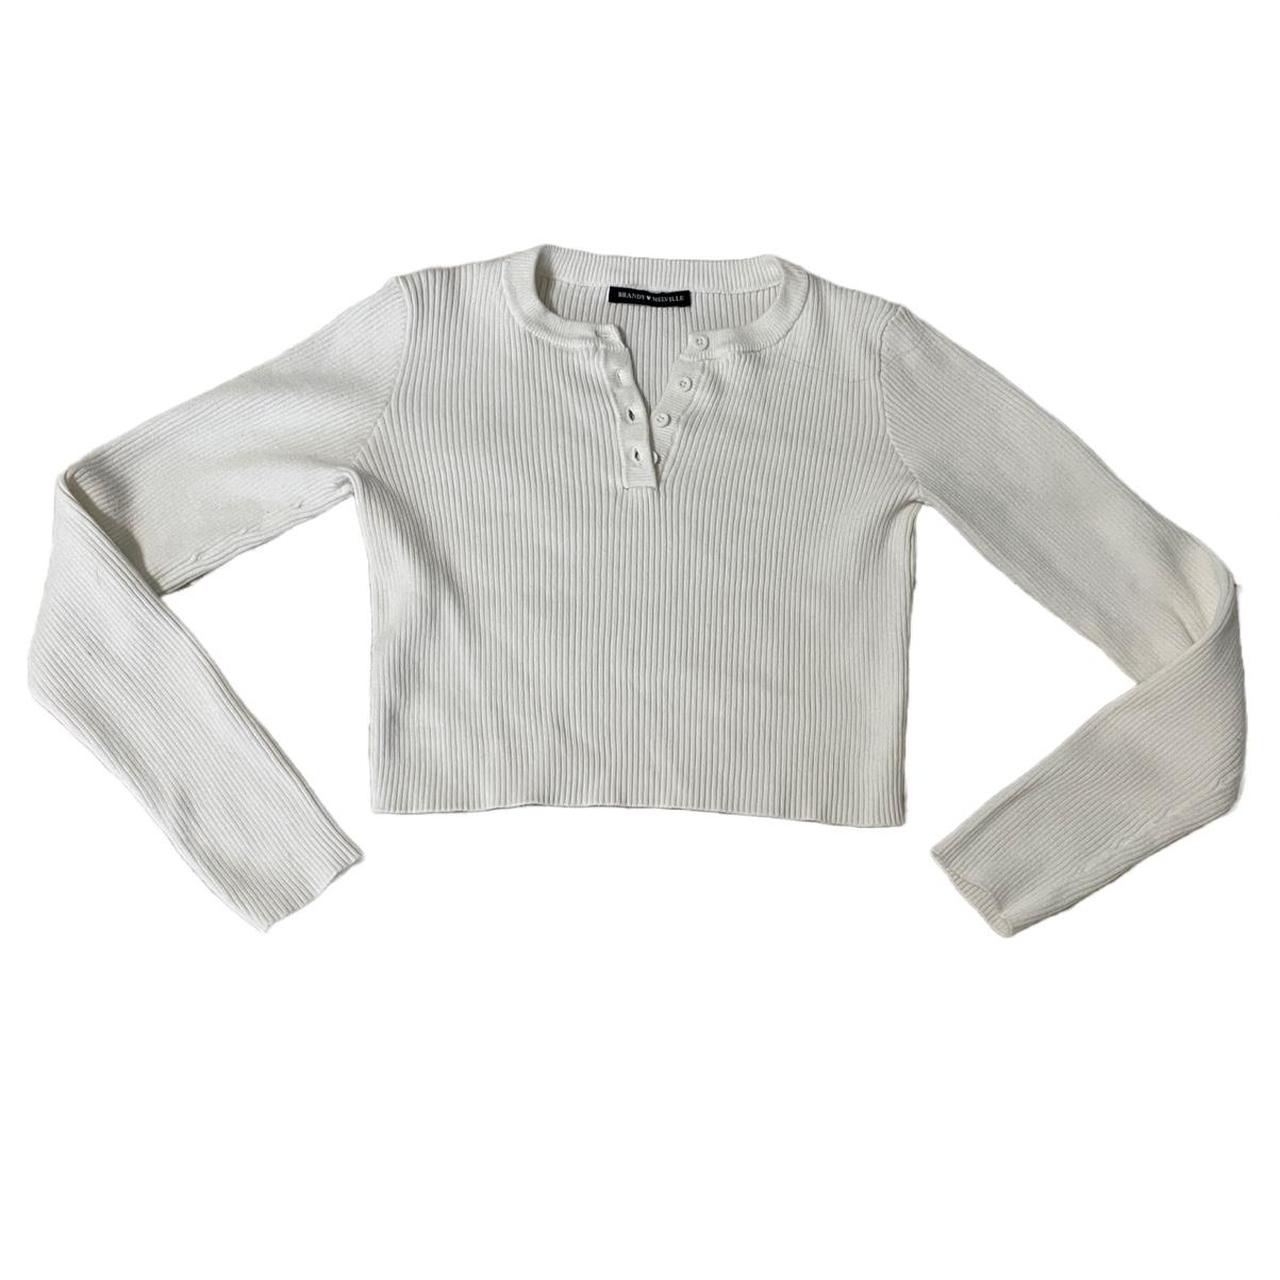 Brandy melville long sleeve top One Size Brand: brandy melville Condition:  NWOT-only worn once Color: white Det.